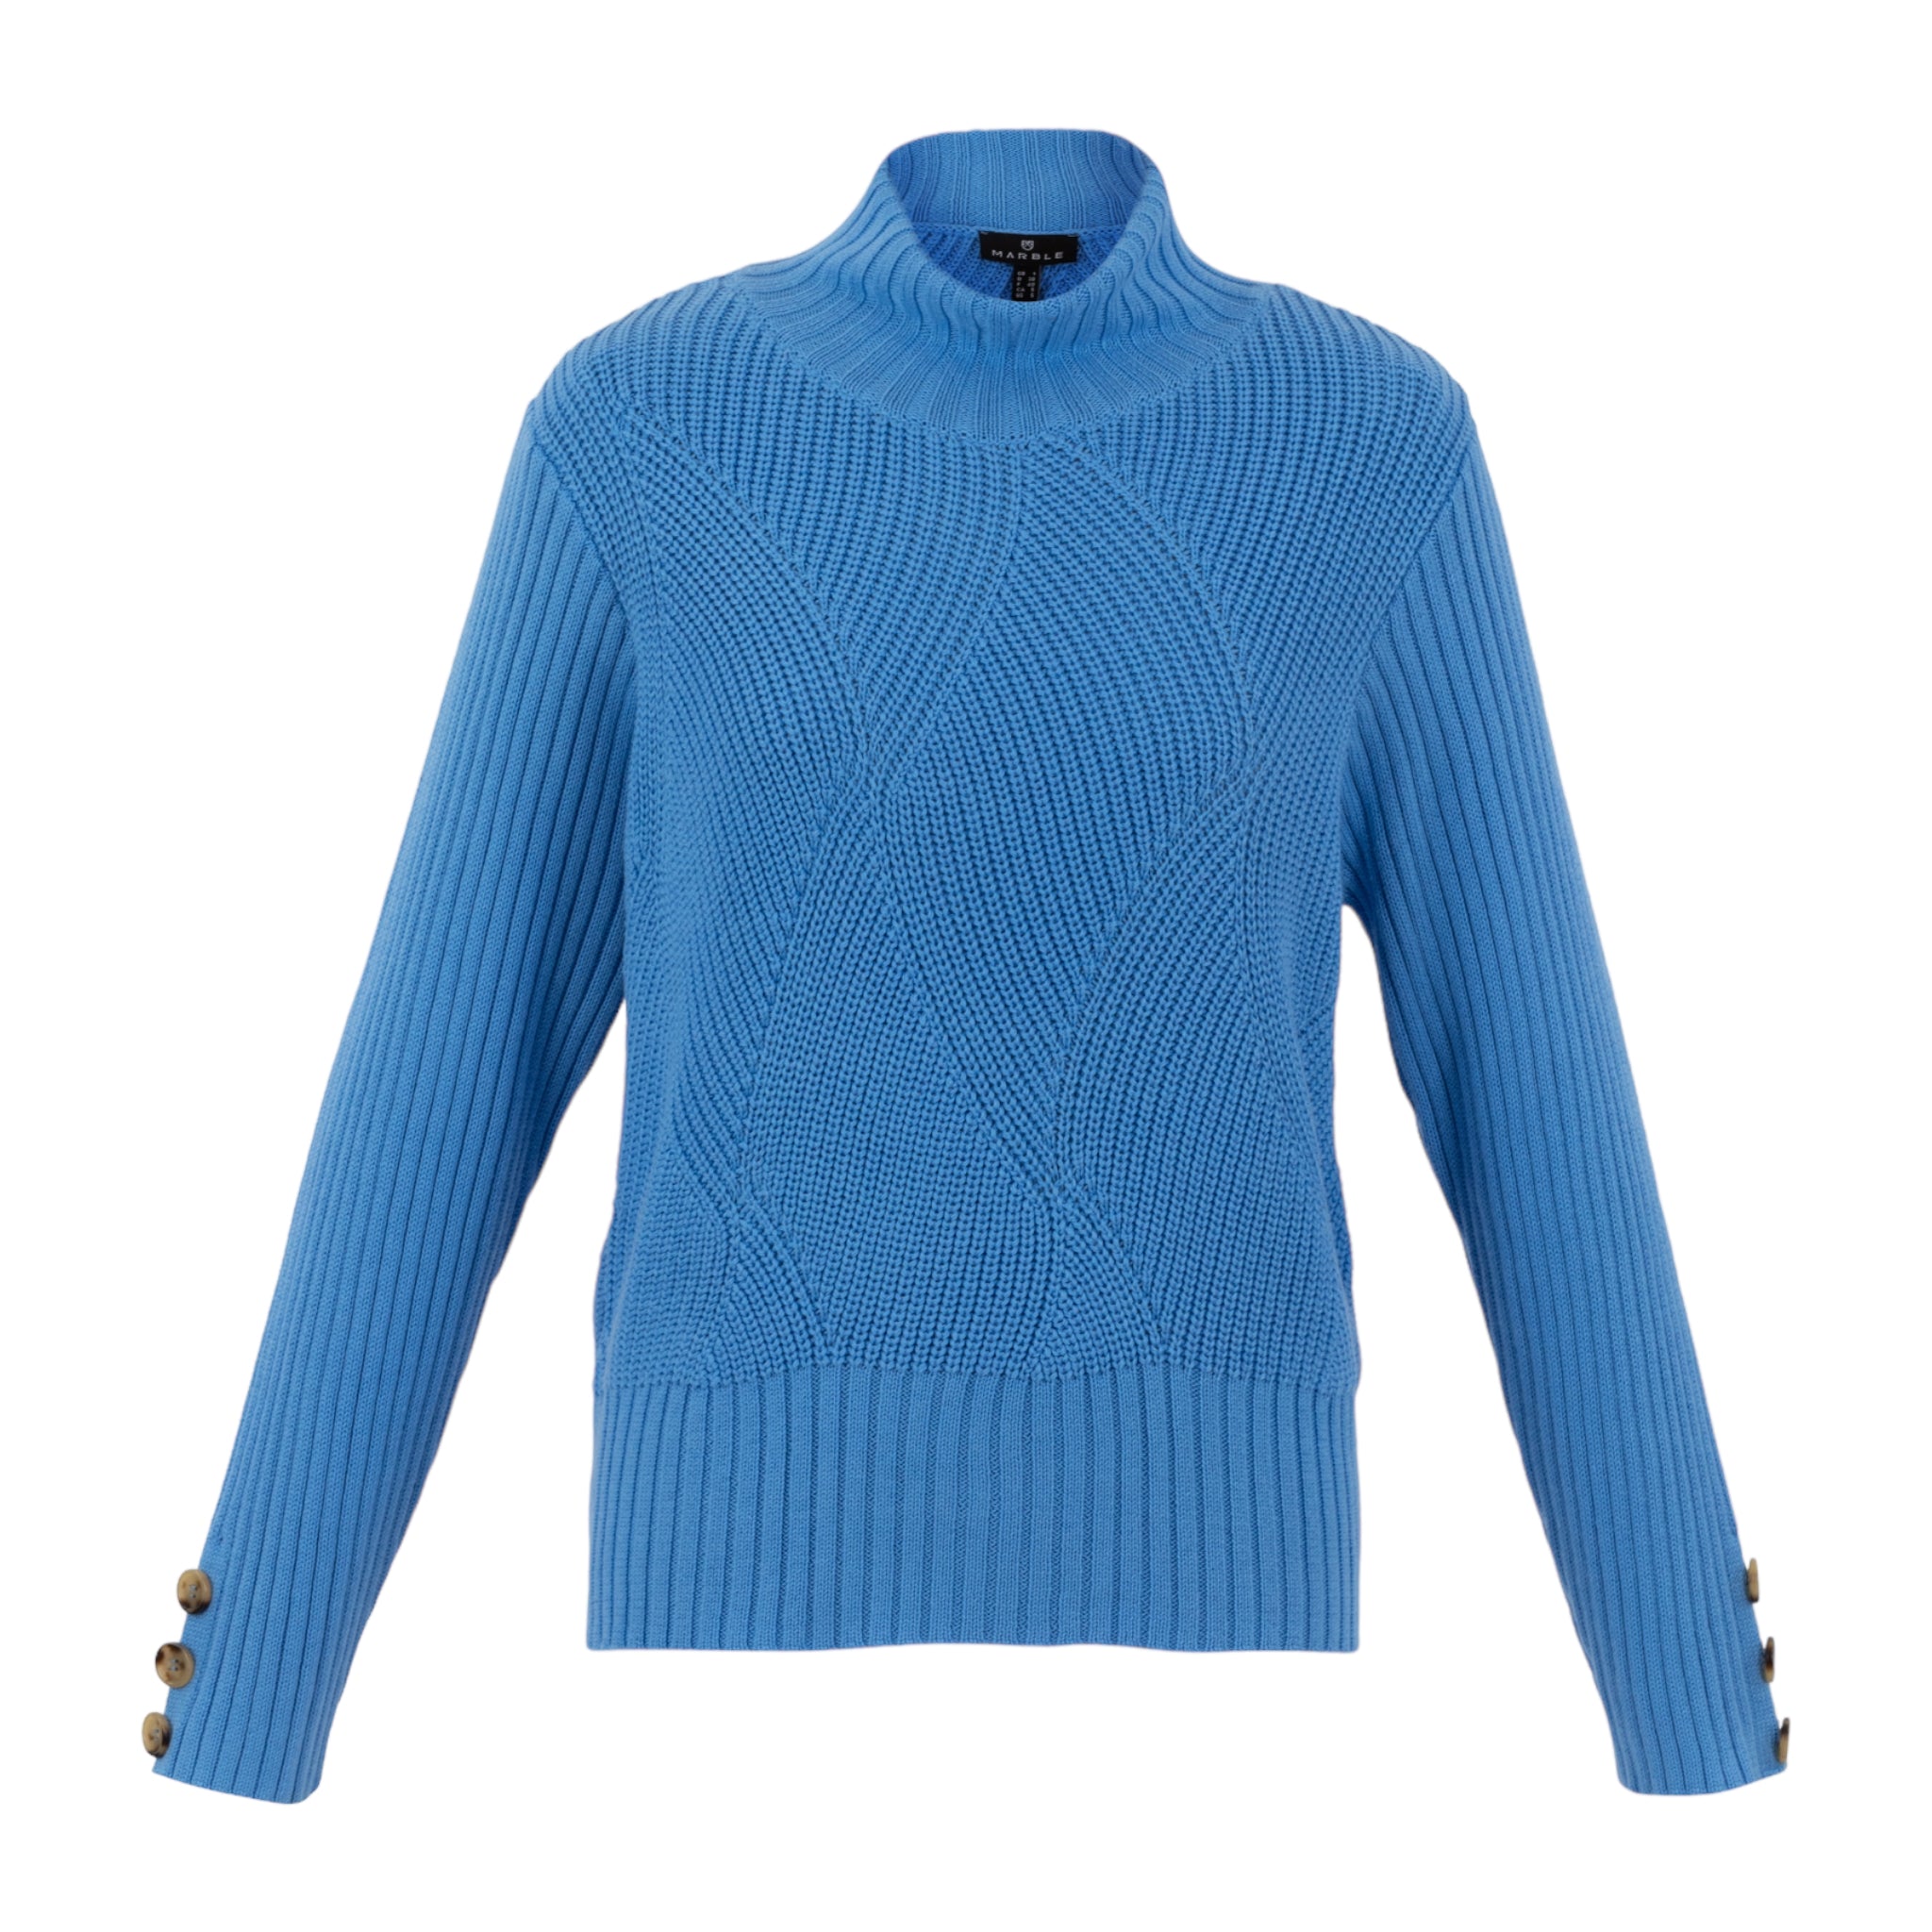 Marble-Button-Sleeve-Sweater-Powder-Blue-Product-Image-7201-213